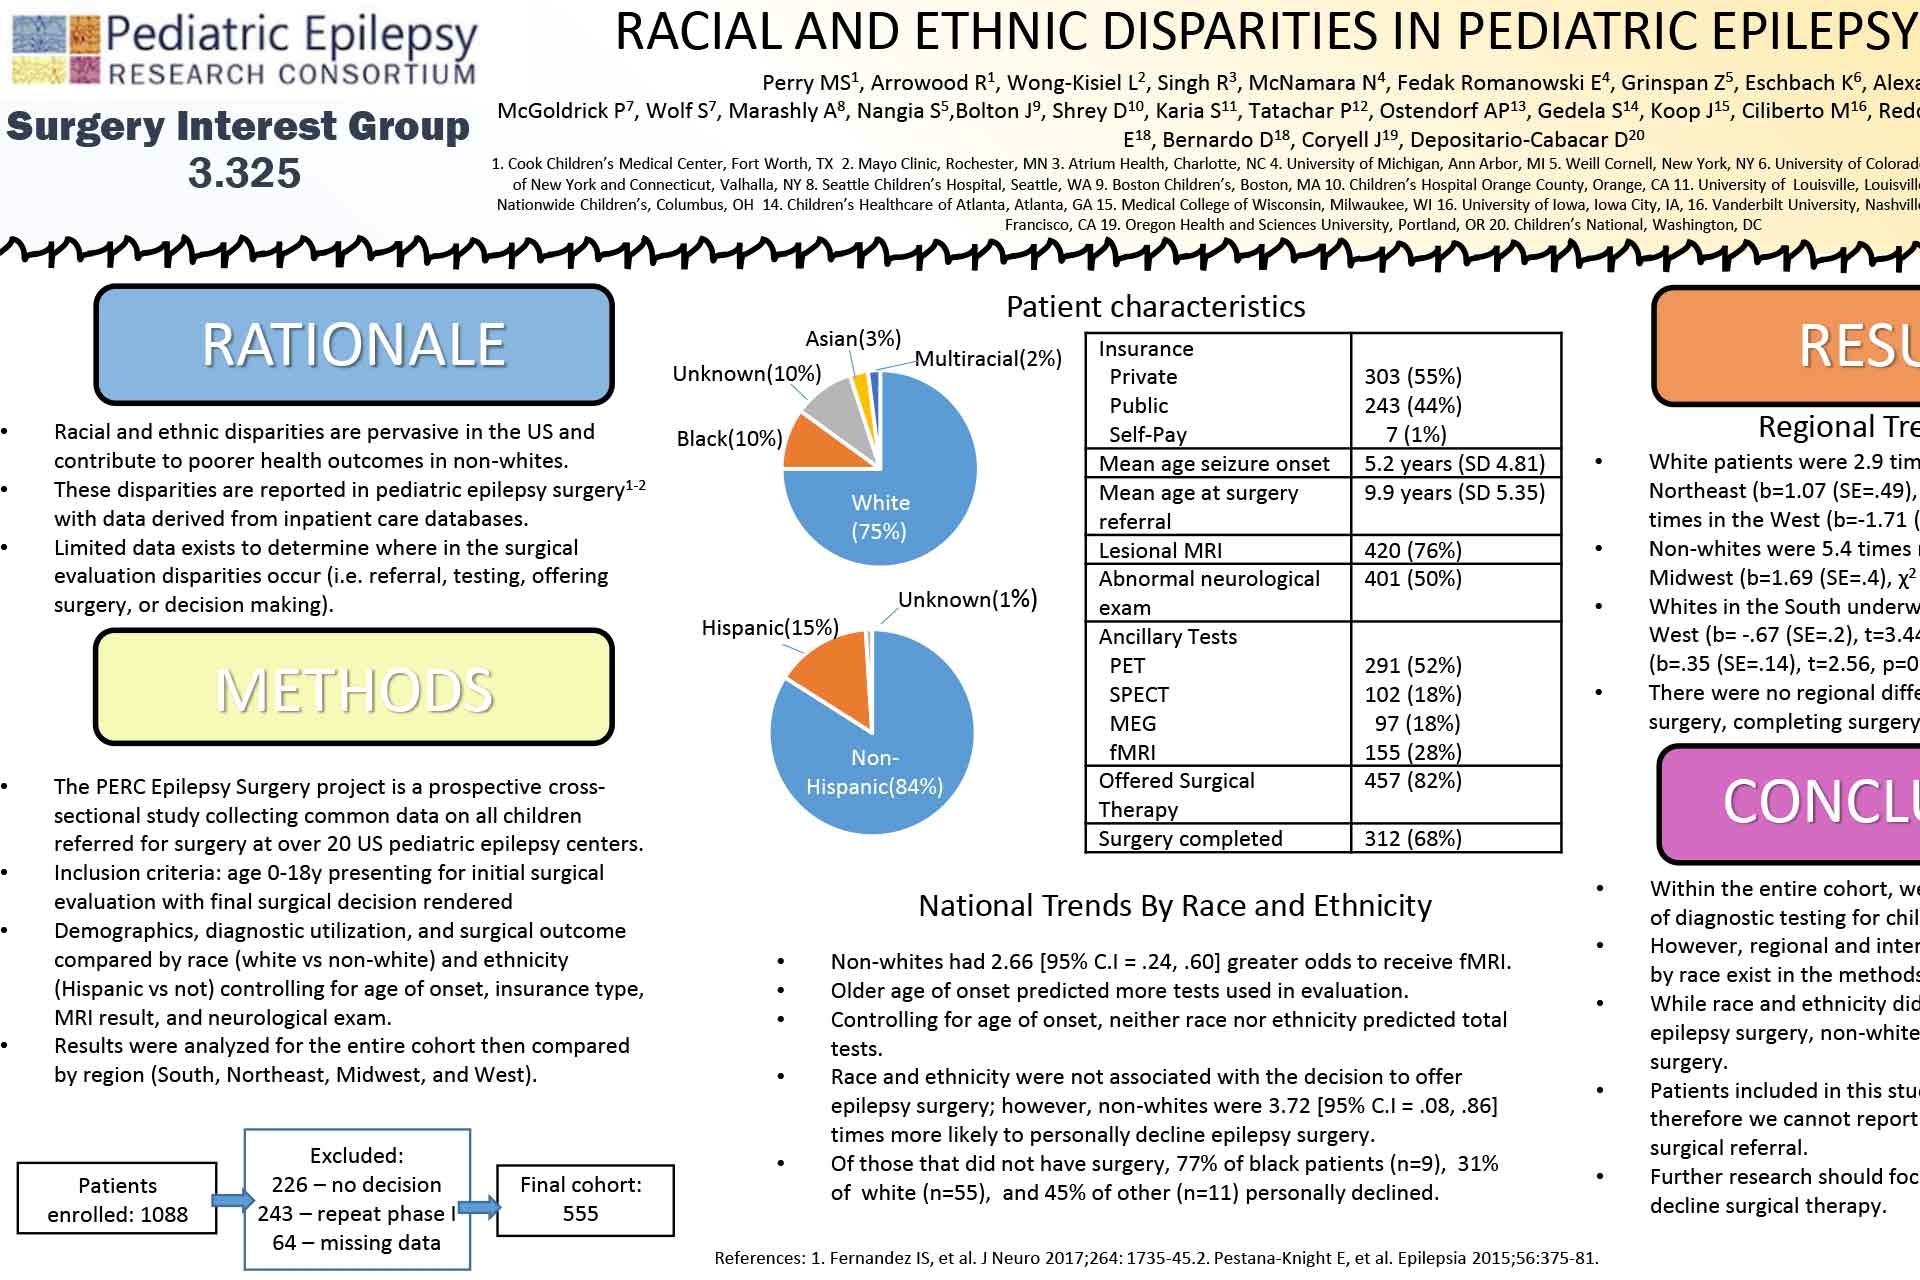 Racial and Ethnic Disparities in Pediatric Epilepsy Surgery